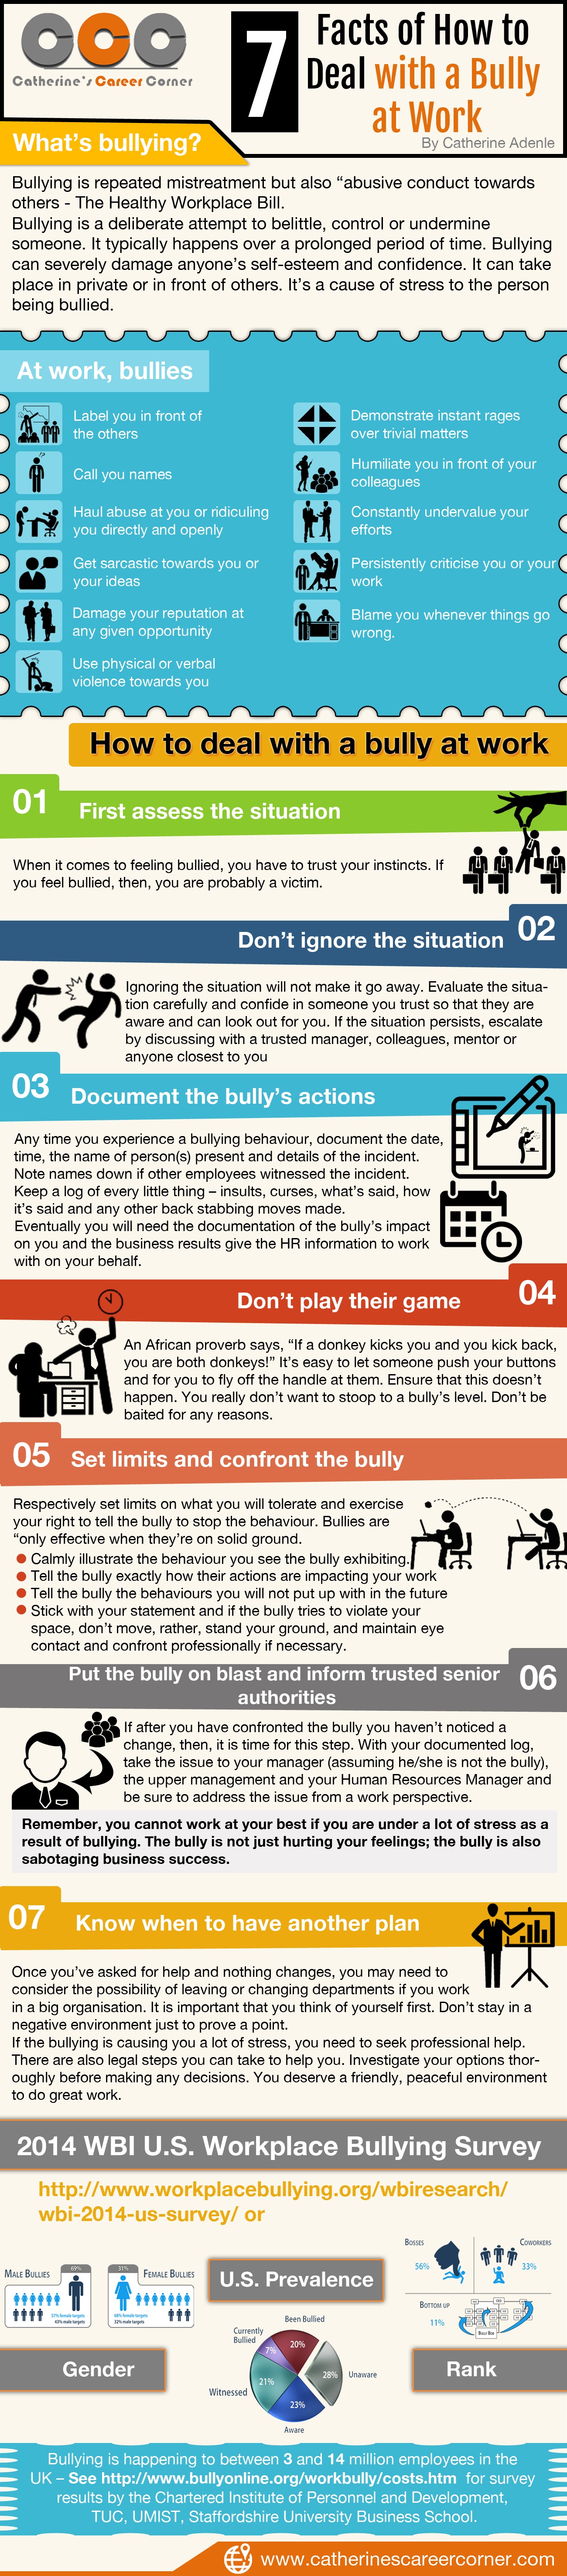 How to deal with a bully at work Infographic